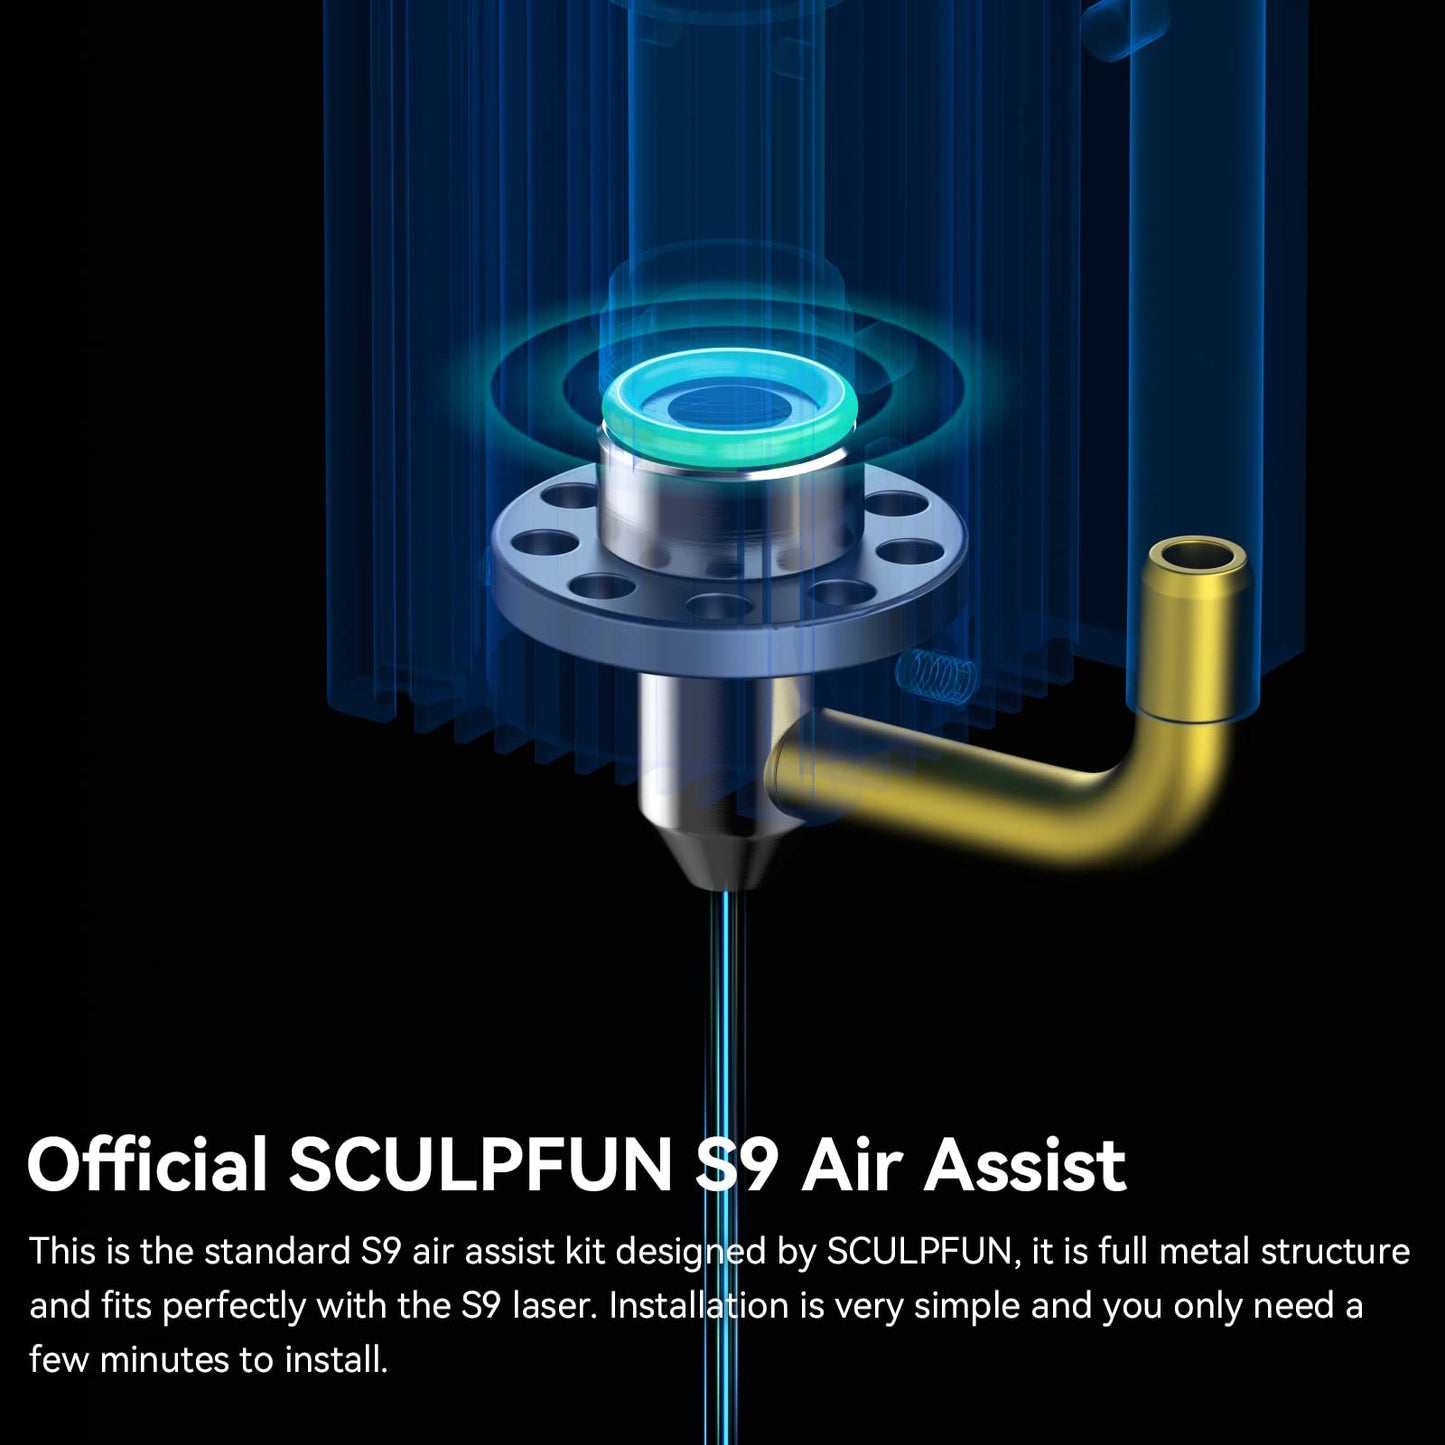 SCULPFUN S9 Air Assist Nozzle,SCULPFUN S9 Laser Engraver Upgrade Accessories,Metal Structure,Easy to Install,Clean Cutting Engraving Wood Acrylic